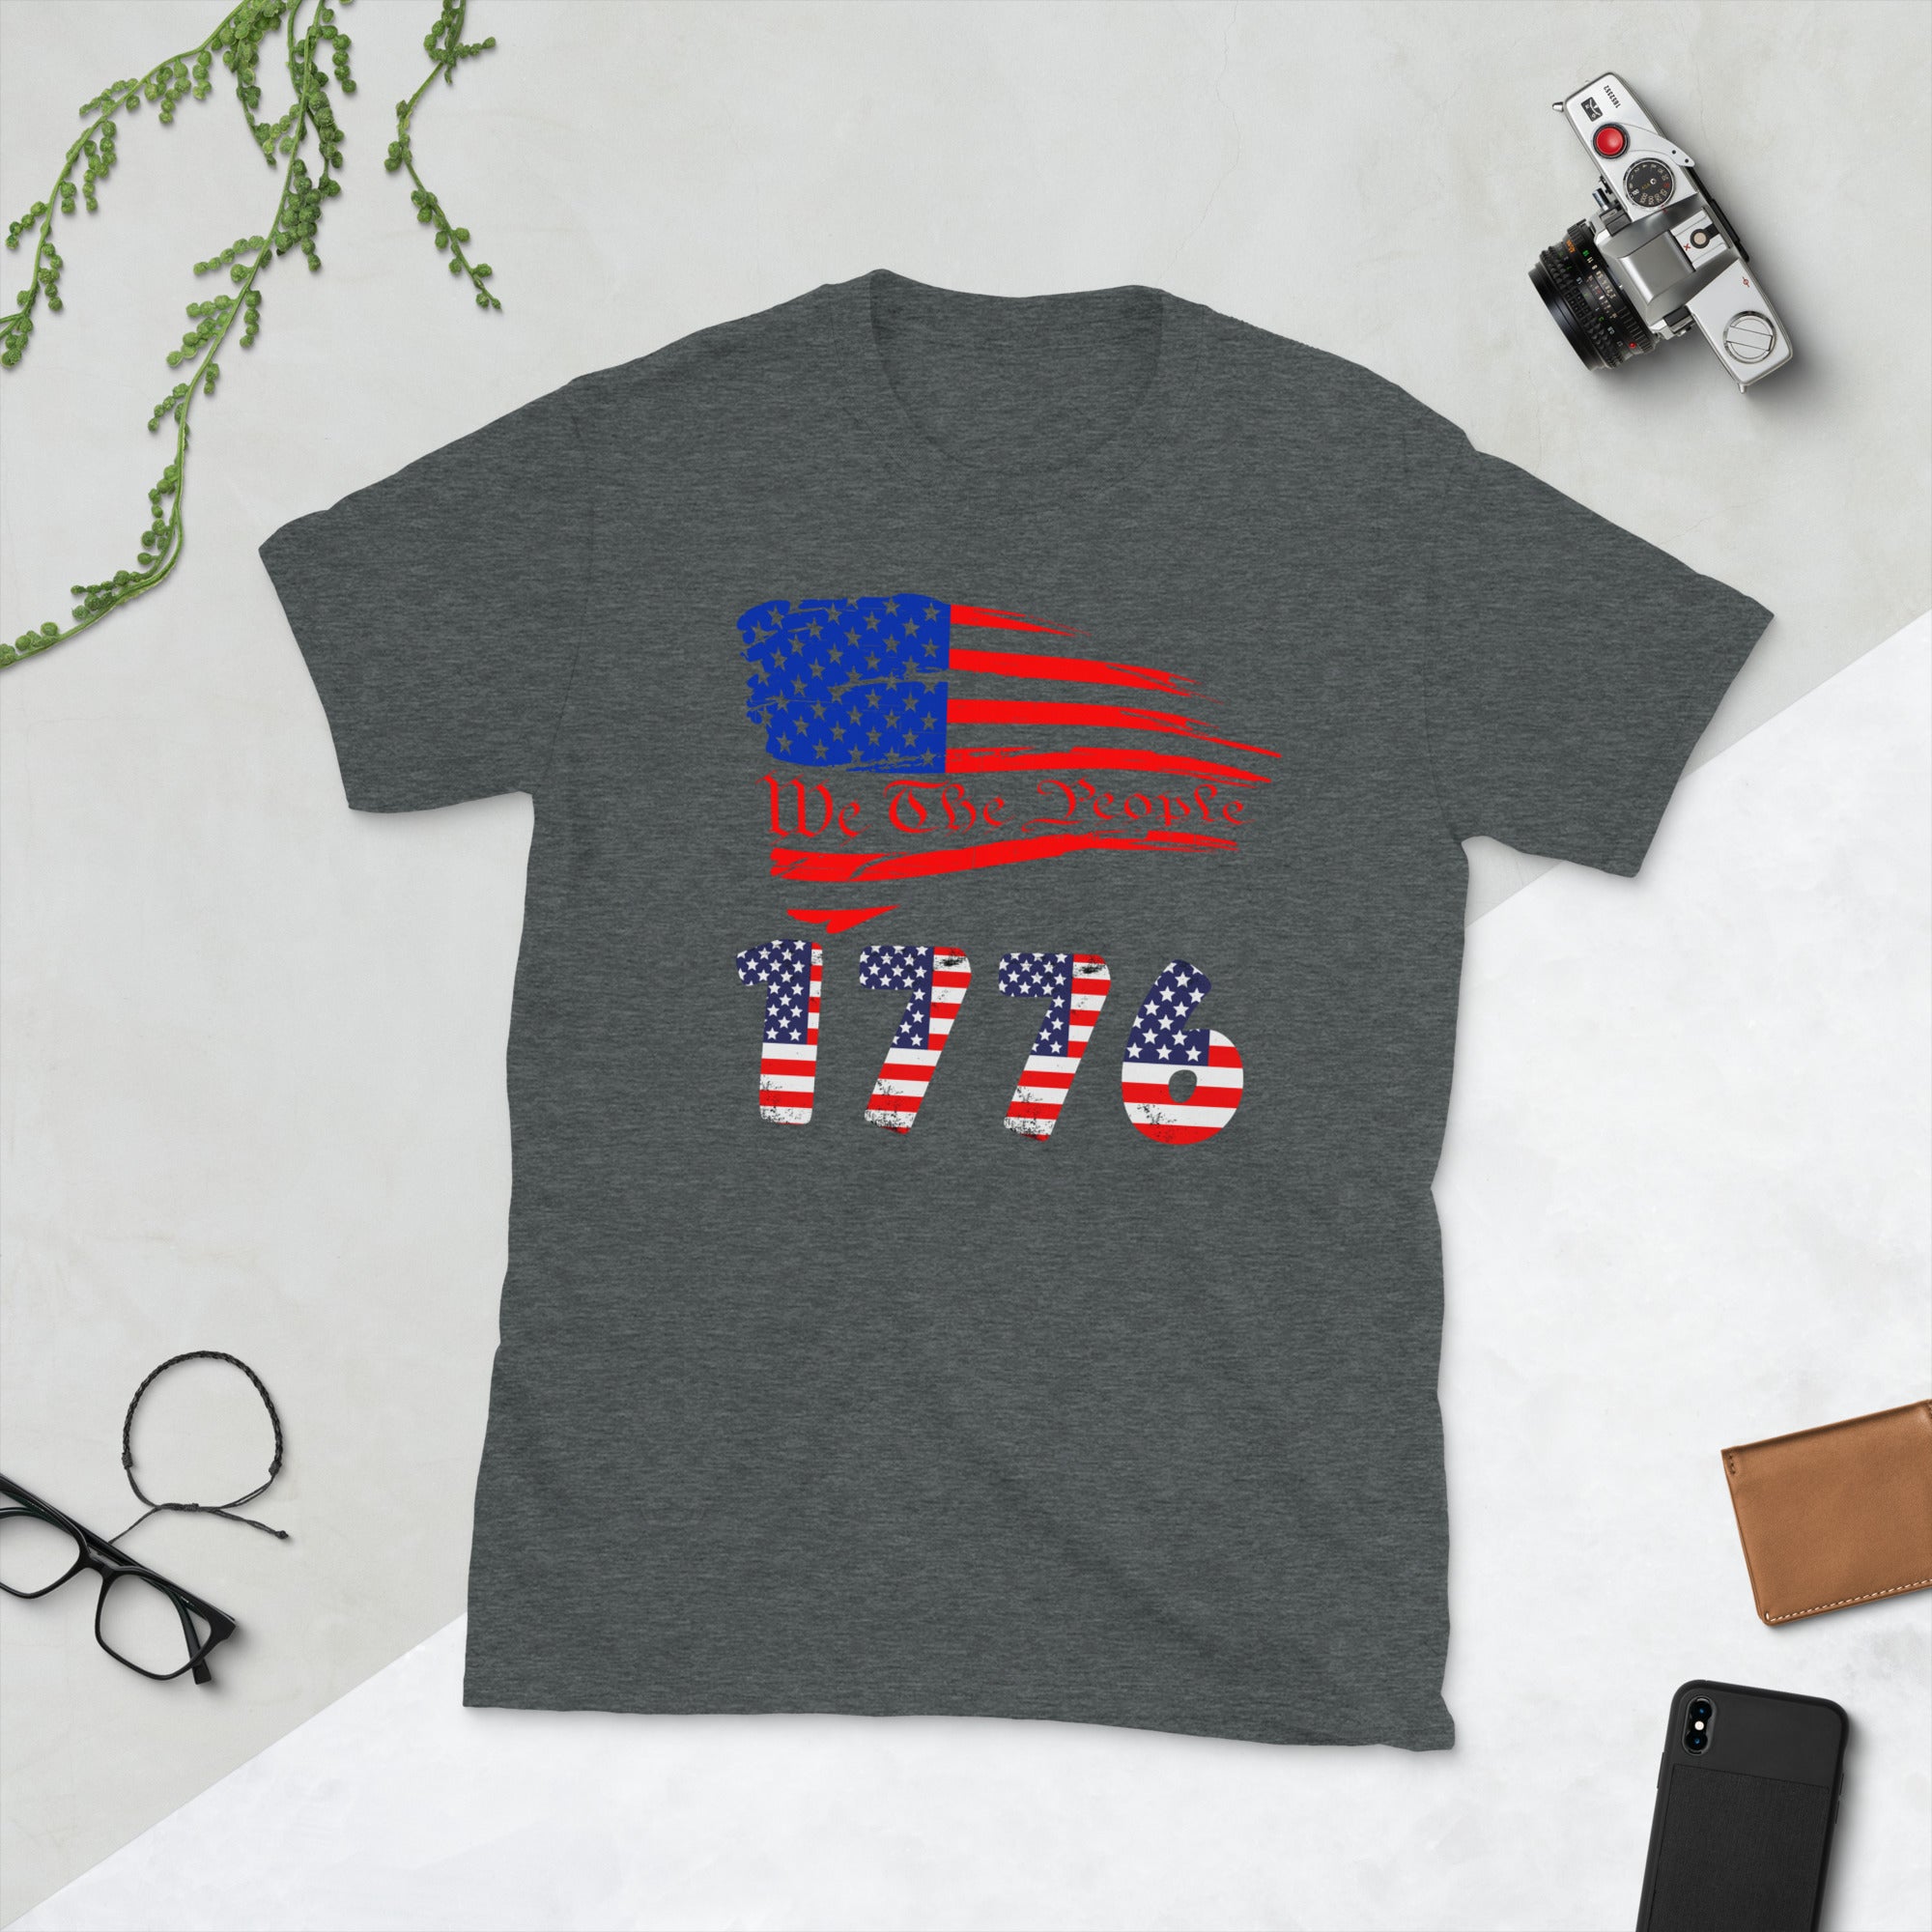 We The People Shirt, 1776 Shirt, Vintage USA American Flag, Patriotic Gifts, We The People Are Pissed Off, Freedom Shirt, Patriot Tee - Madeinsea©